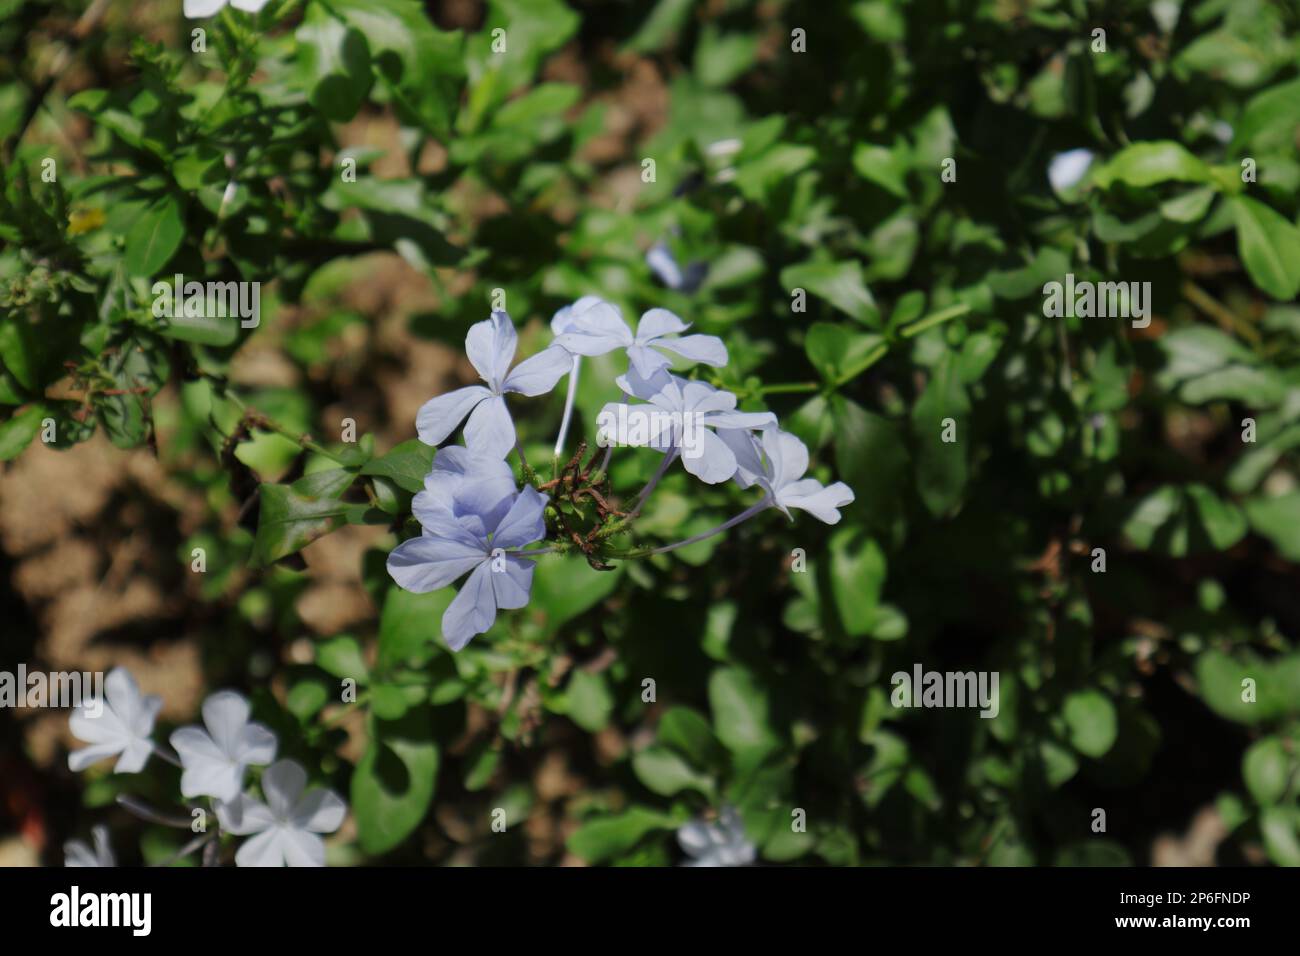 Flowers of a blue plumbago plant (Plumbago Auriculata) in the garden Stock Photo